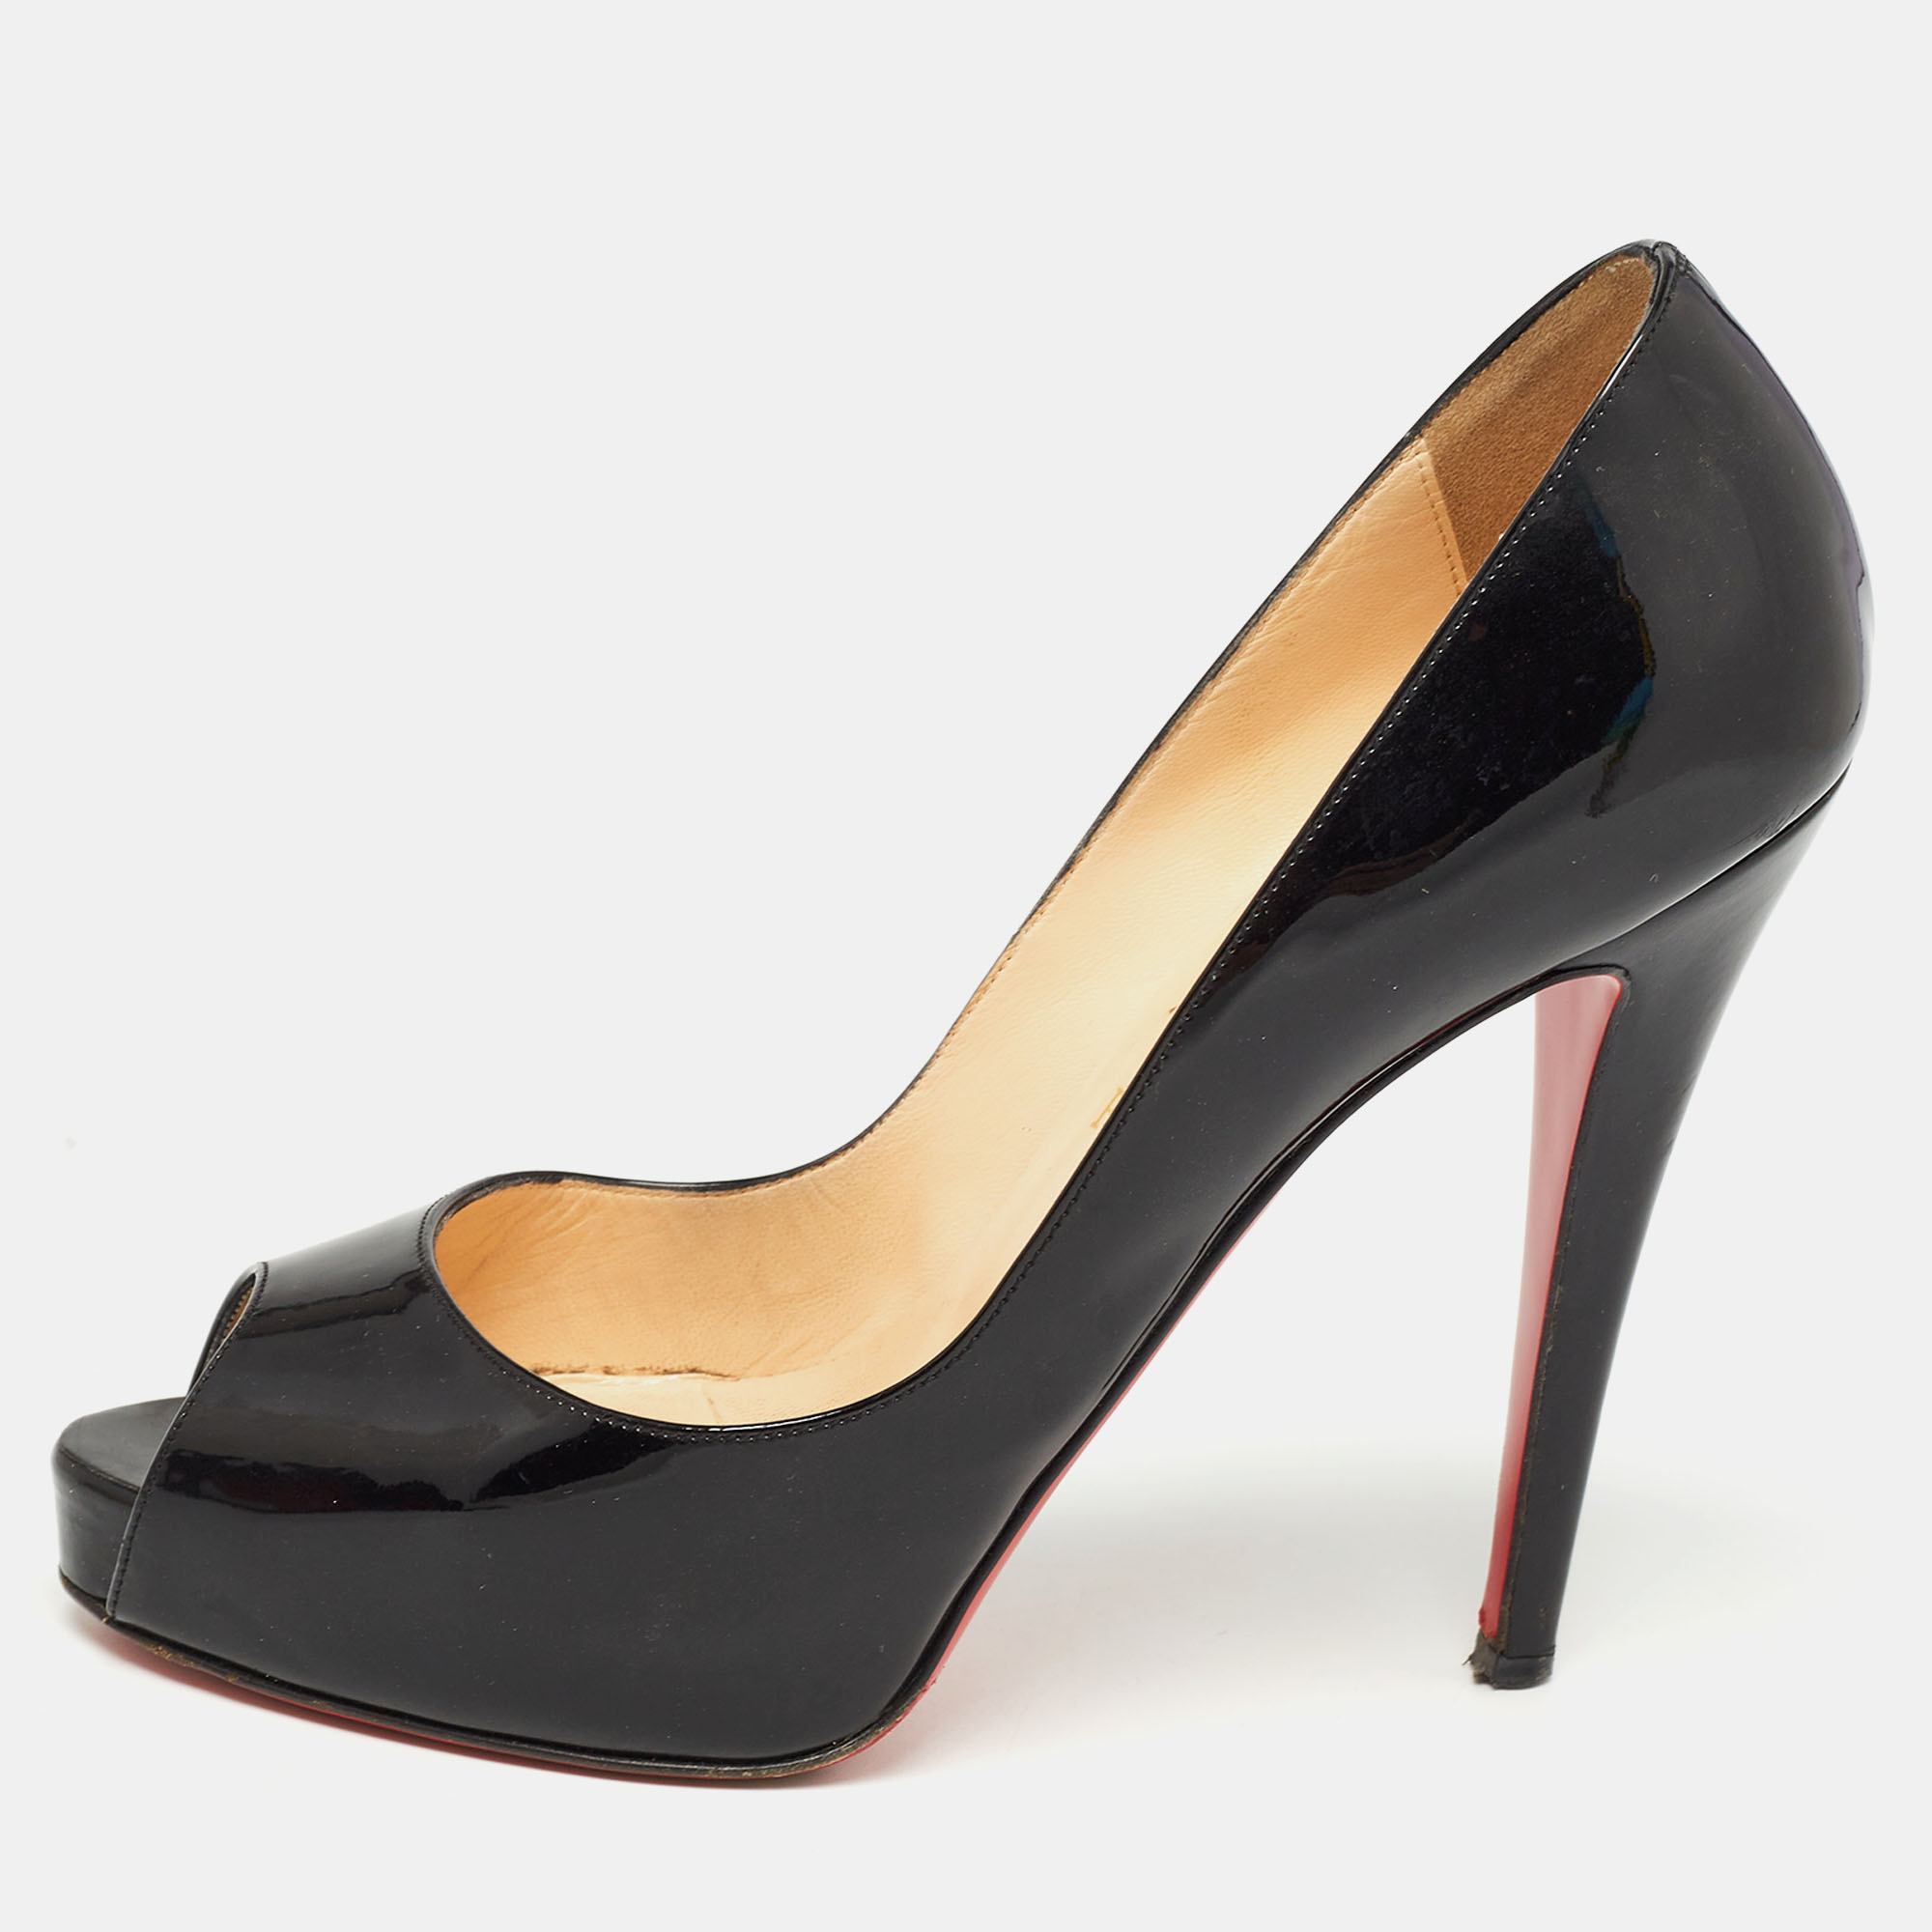 The architectural silhouette and precise cuts of this pair of pumps from Christian Louboutin exemplify the brands mastery in the art of stiletto making. Finely created from patent leather and it is lifted upon 12.5cm heels. The signature red lacquered sole will add a touch of luxury to every step.